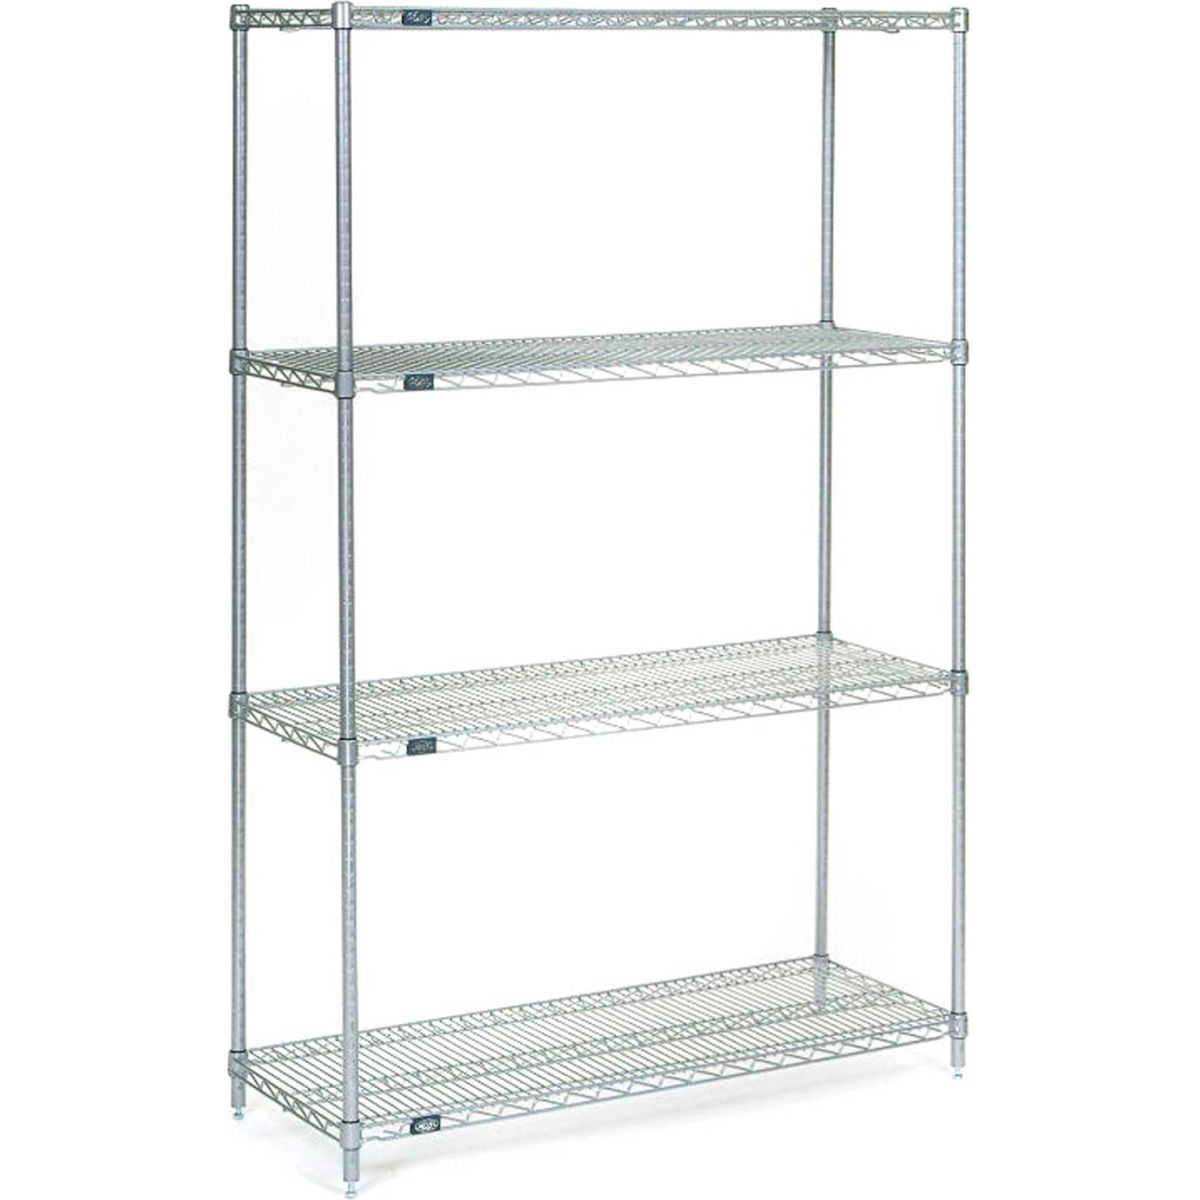 Picture of Global Industrial 14486S 63 x 48 x 14 in. Nexel Stainless Steel Starter Wire Shelving